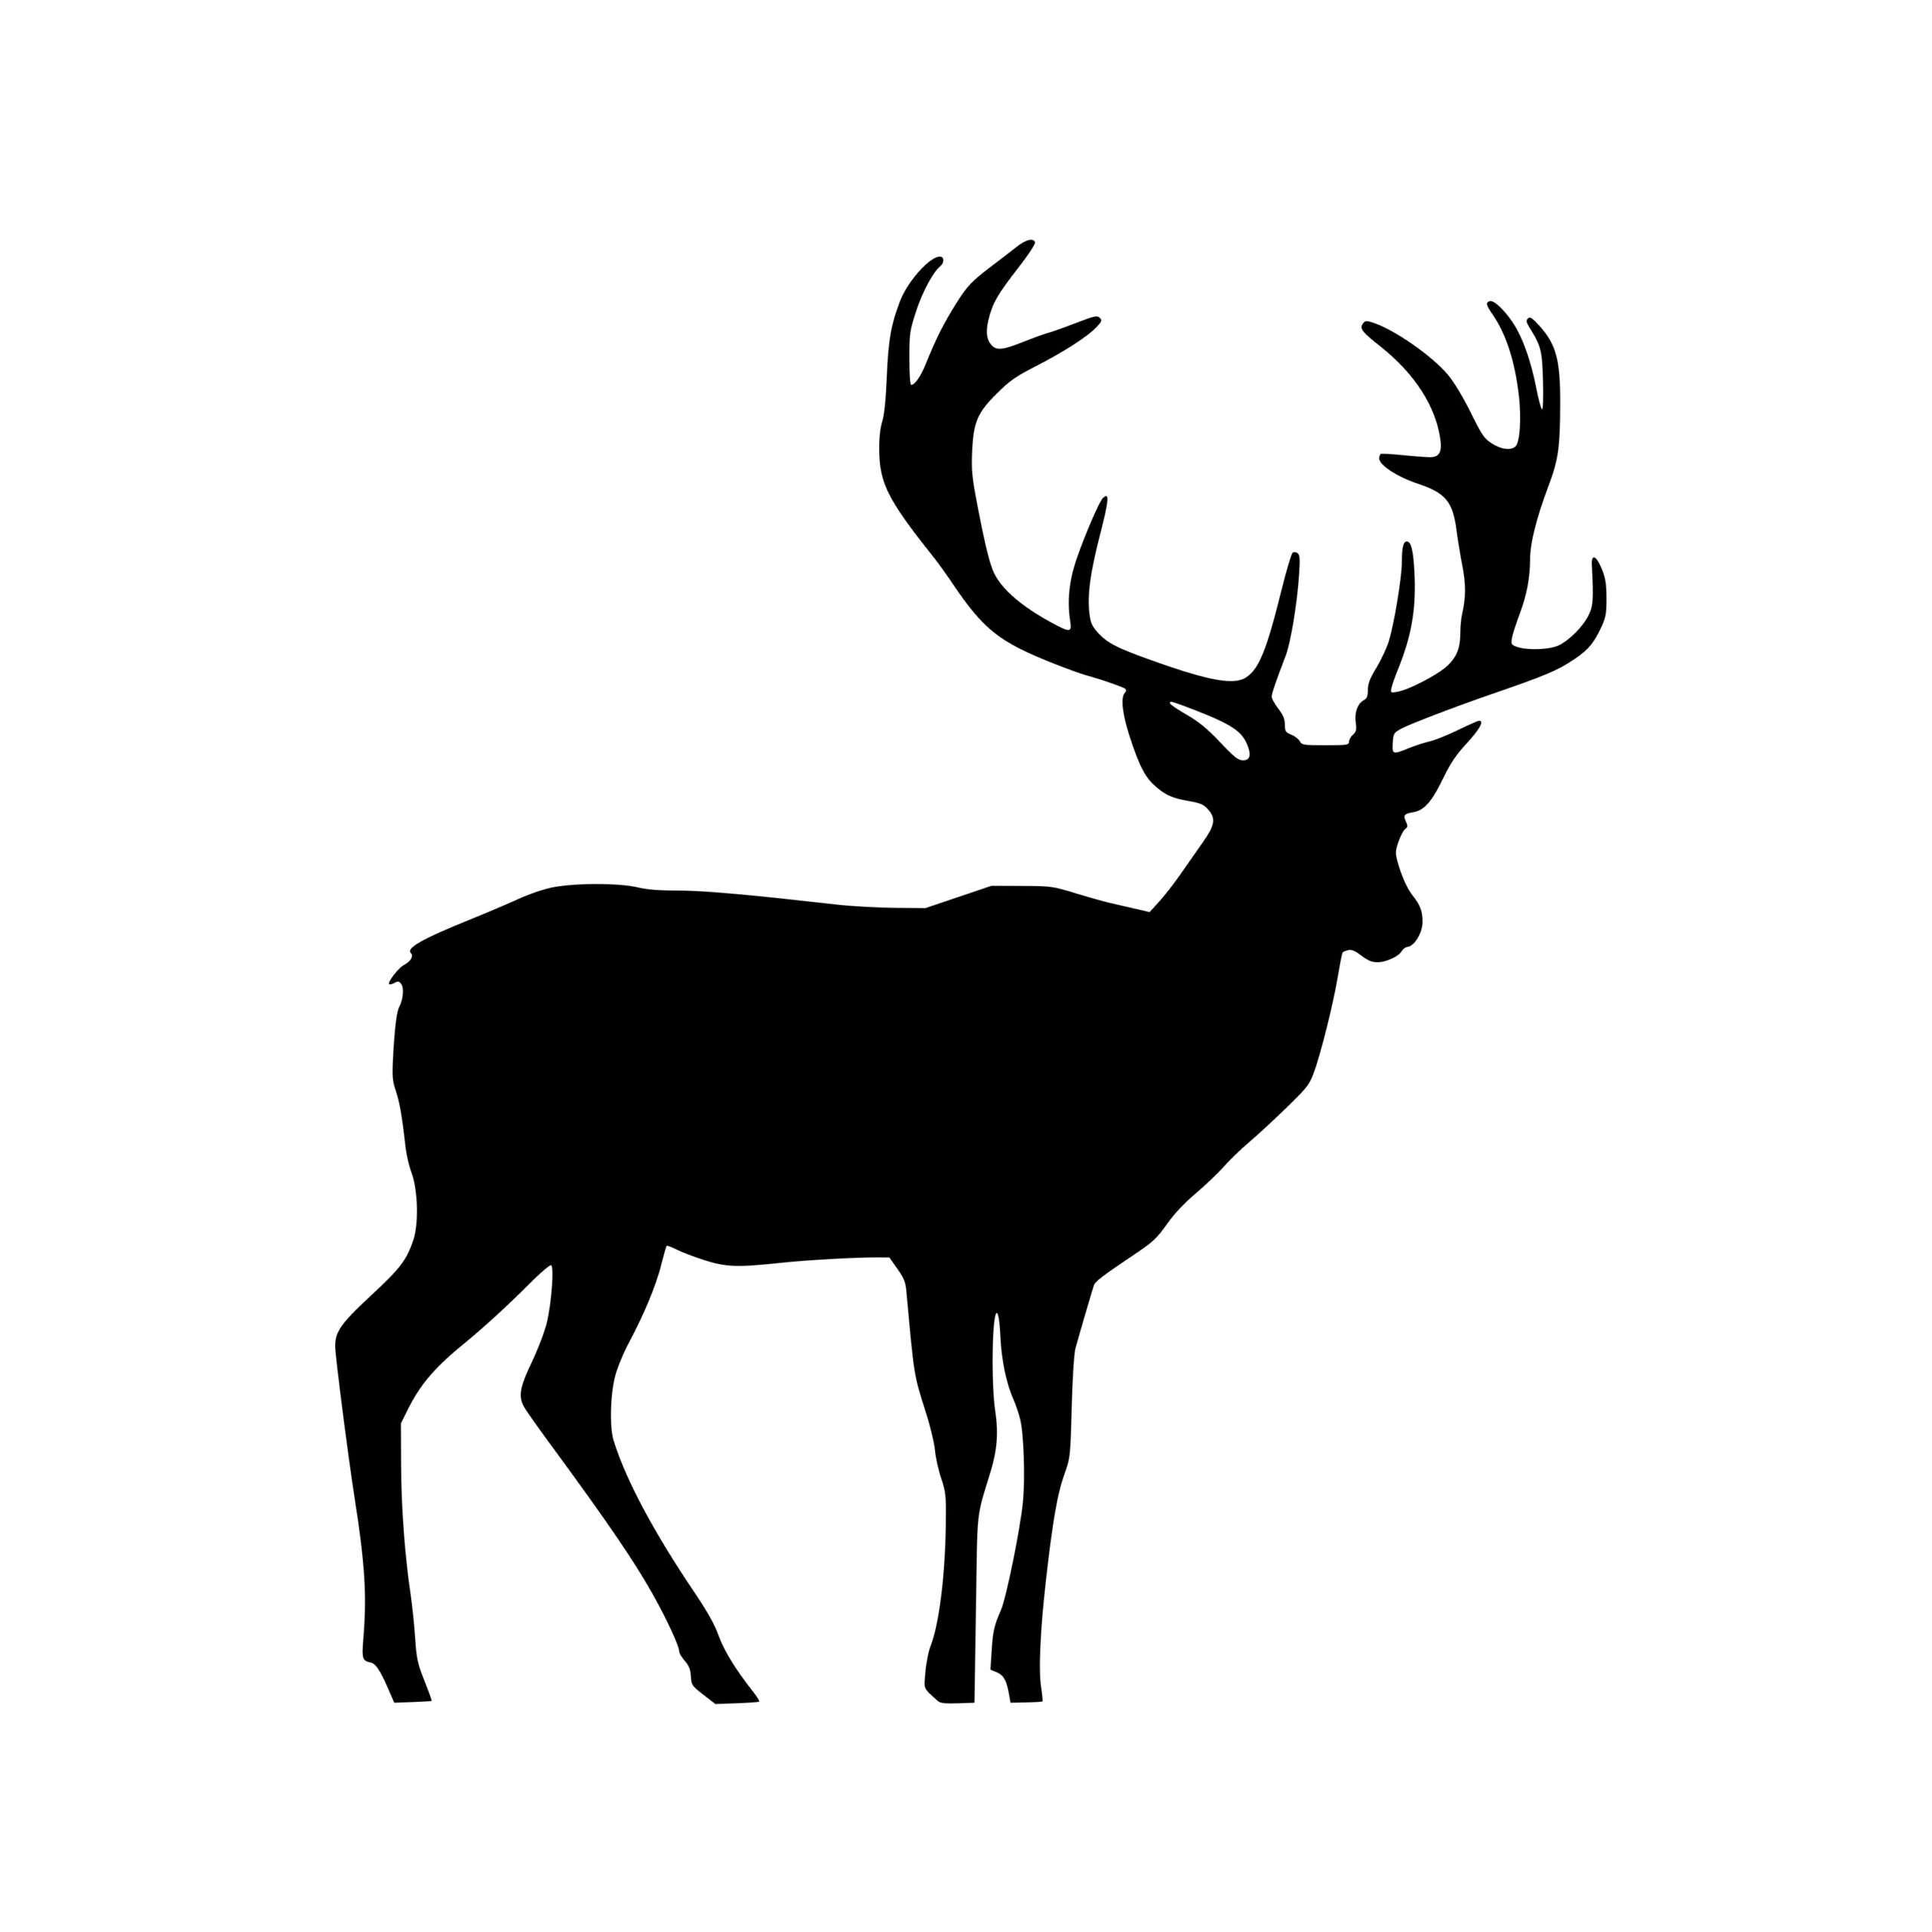 Majestic Stag SVG File: Instant Download for Cricut, Silhouette, Laser